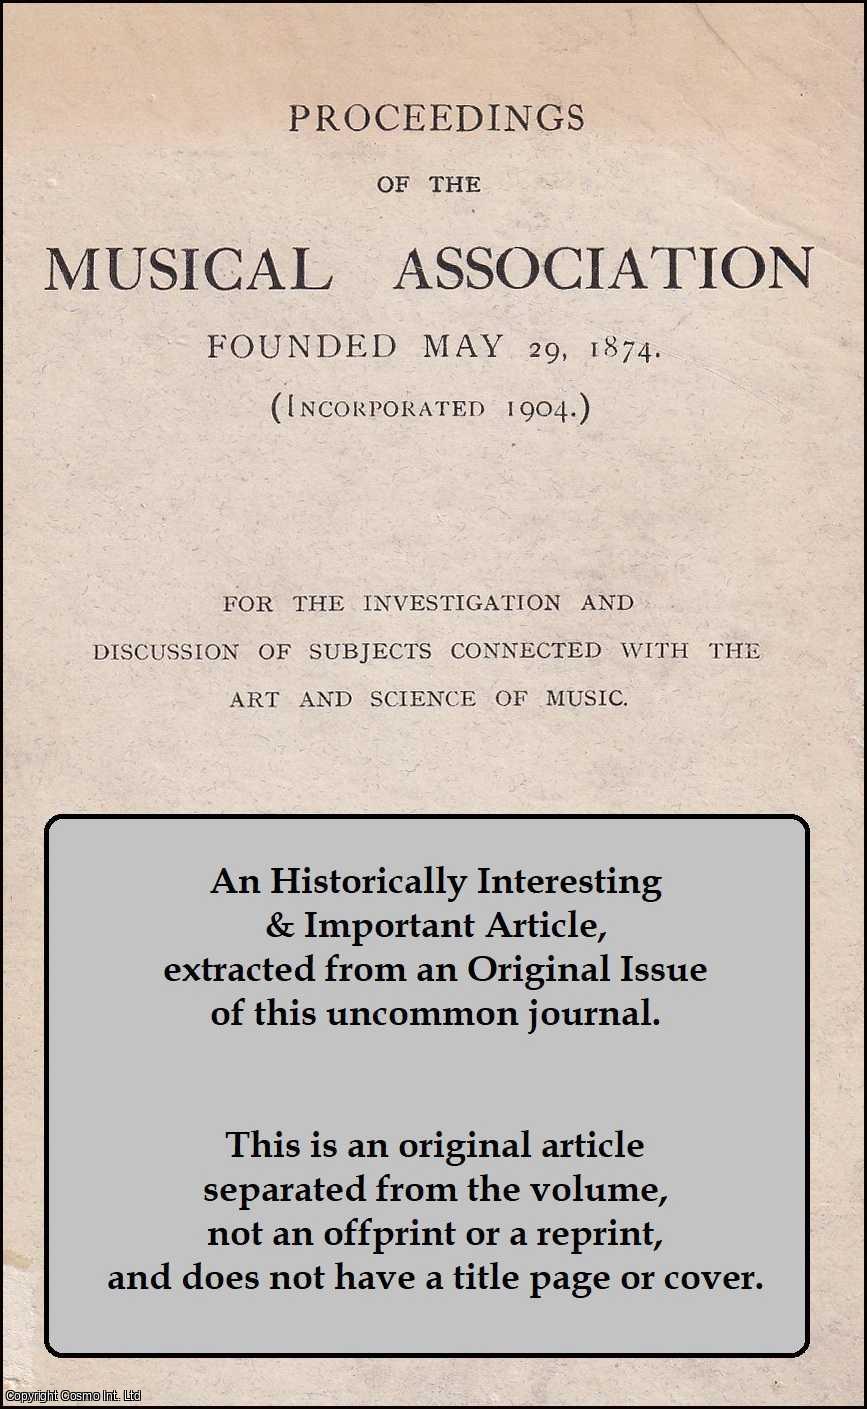 J. F. R. Stainer - The Notation of Mensurable Music. An original article from The Proceedings of The Musical Association, 1900.